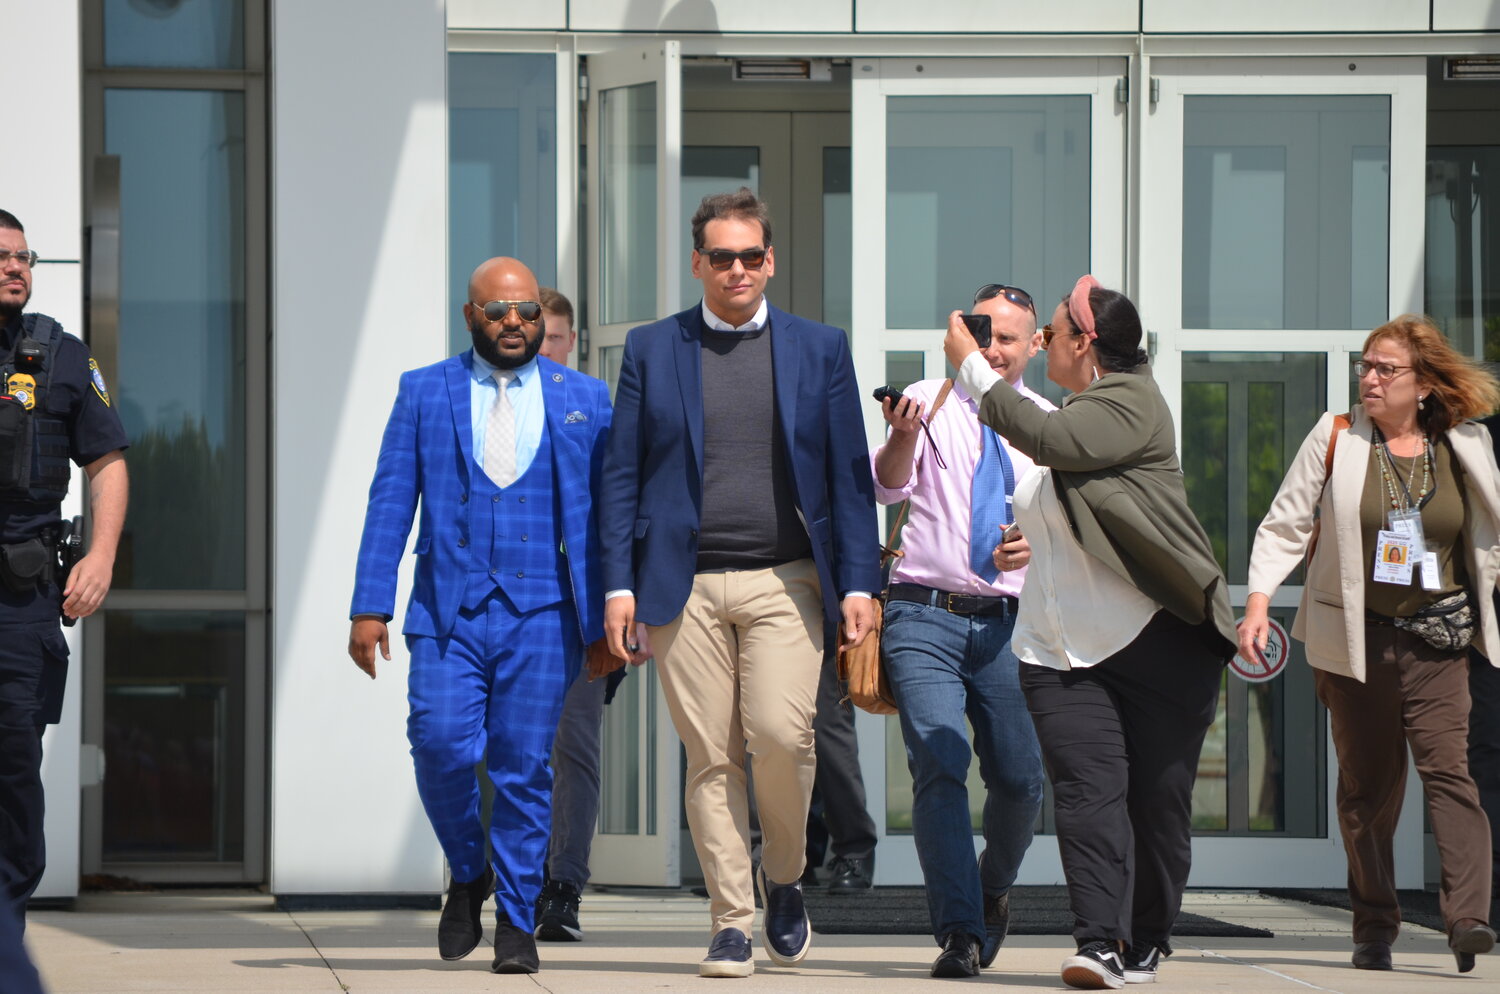 U.S. Rep. George Santos walks out of the courthouse in Central Islip on Wednesday after pleading not guilty to multiple federal charges including wire fraud and money laundering.